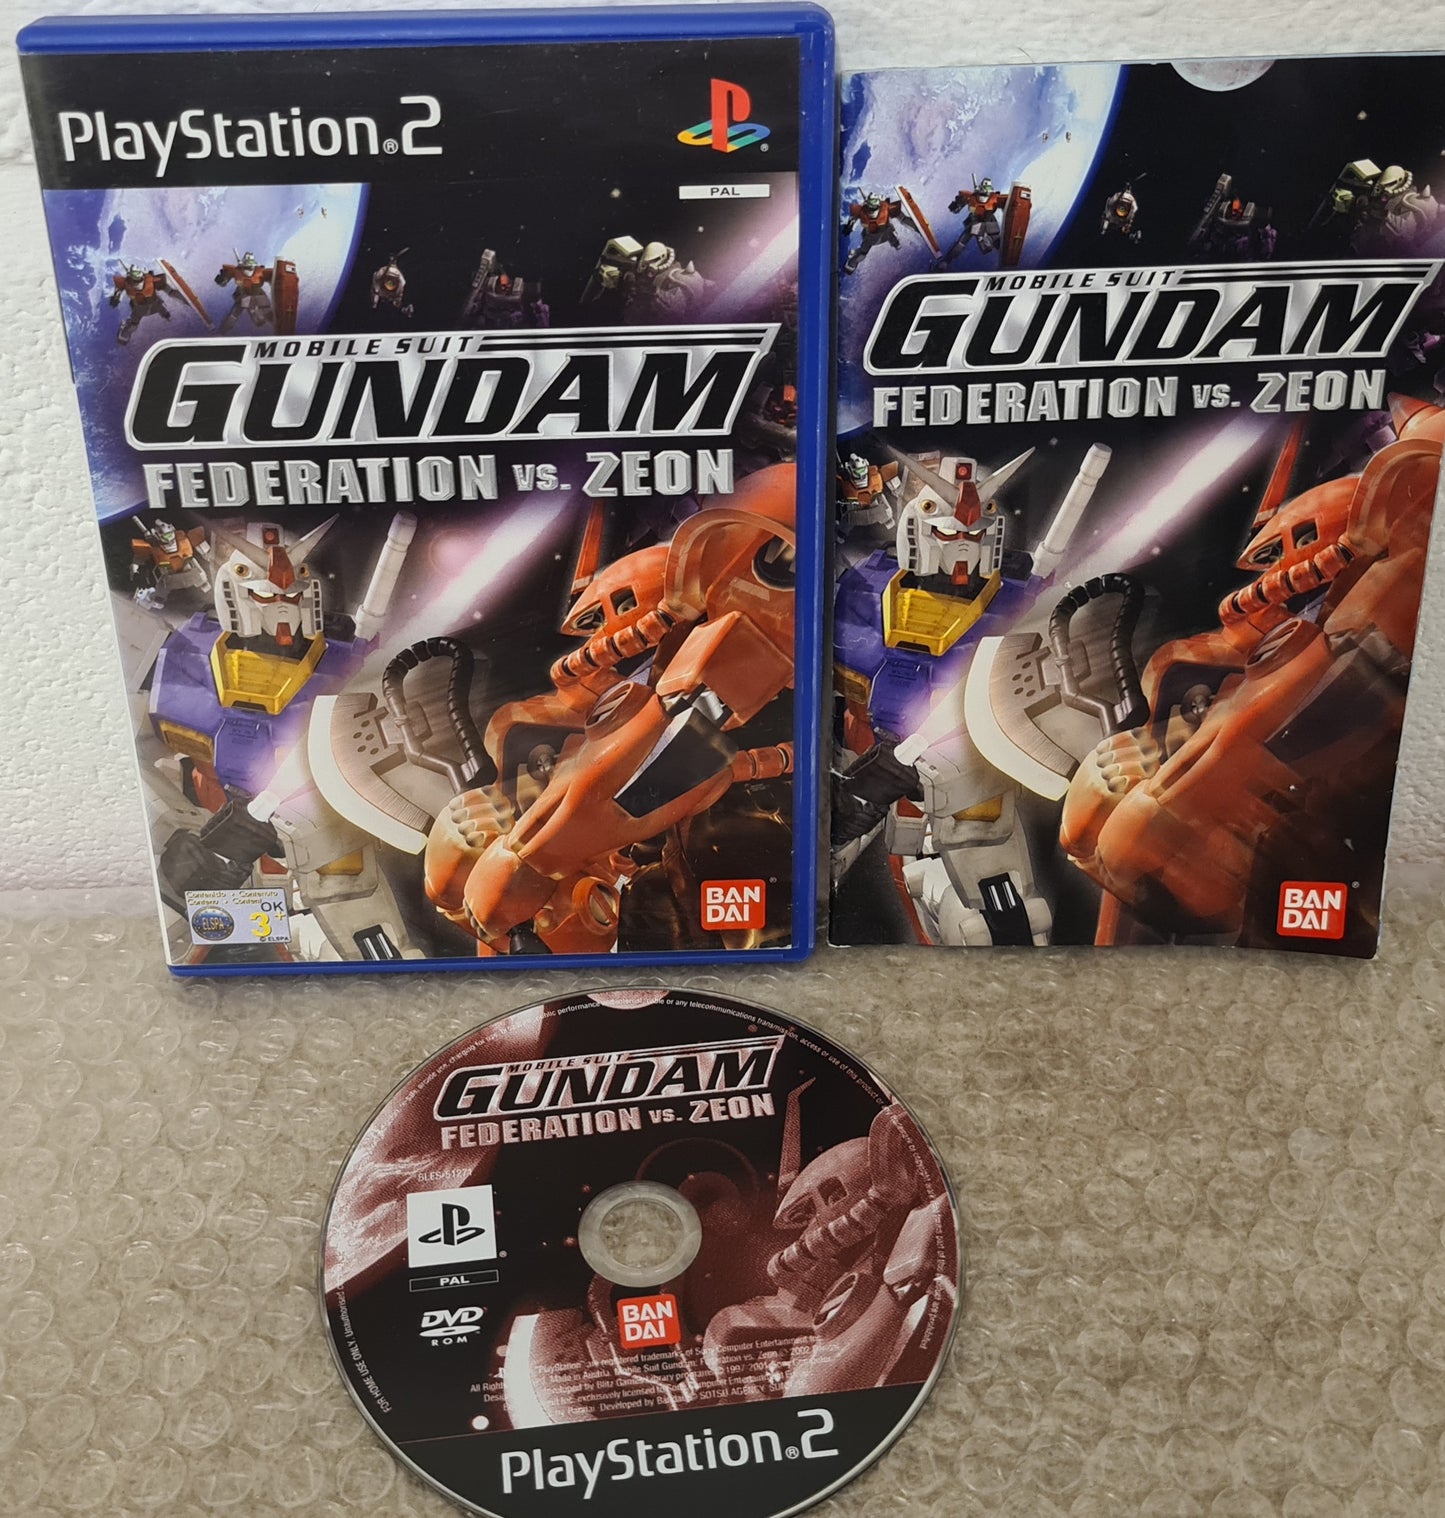 Mobile Suit Gundam Federation Vs Zeon Sony Playstation 2 (PS2) Game